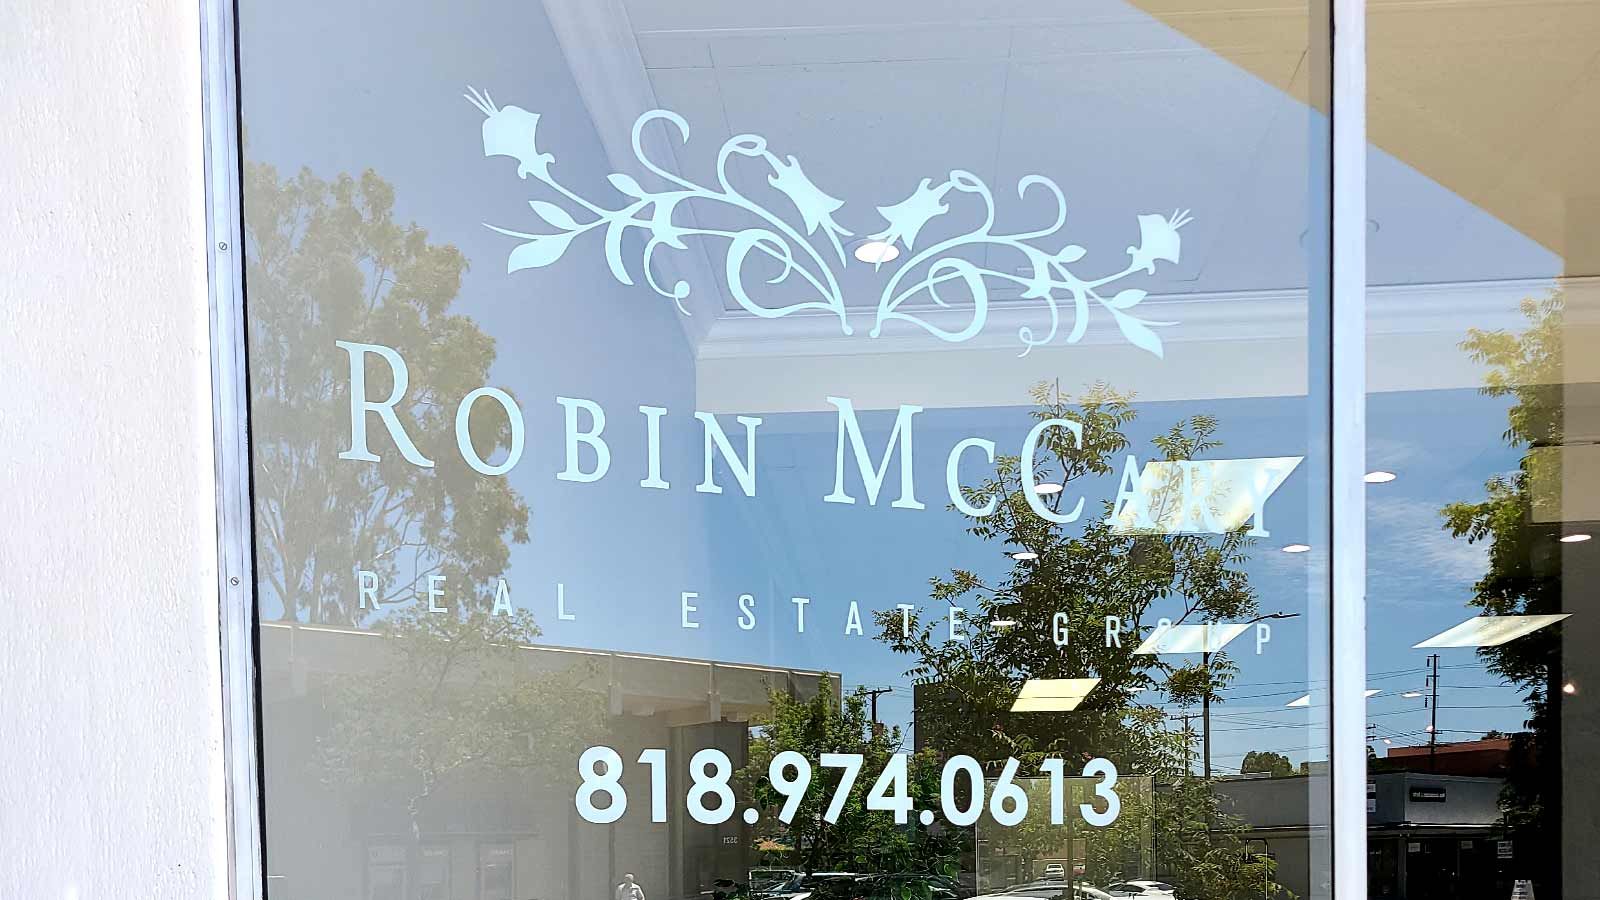 Robin Mccary Real Estate Group vinyl letters